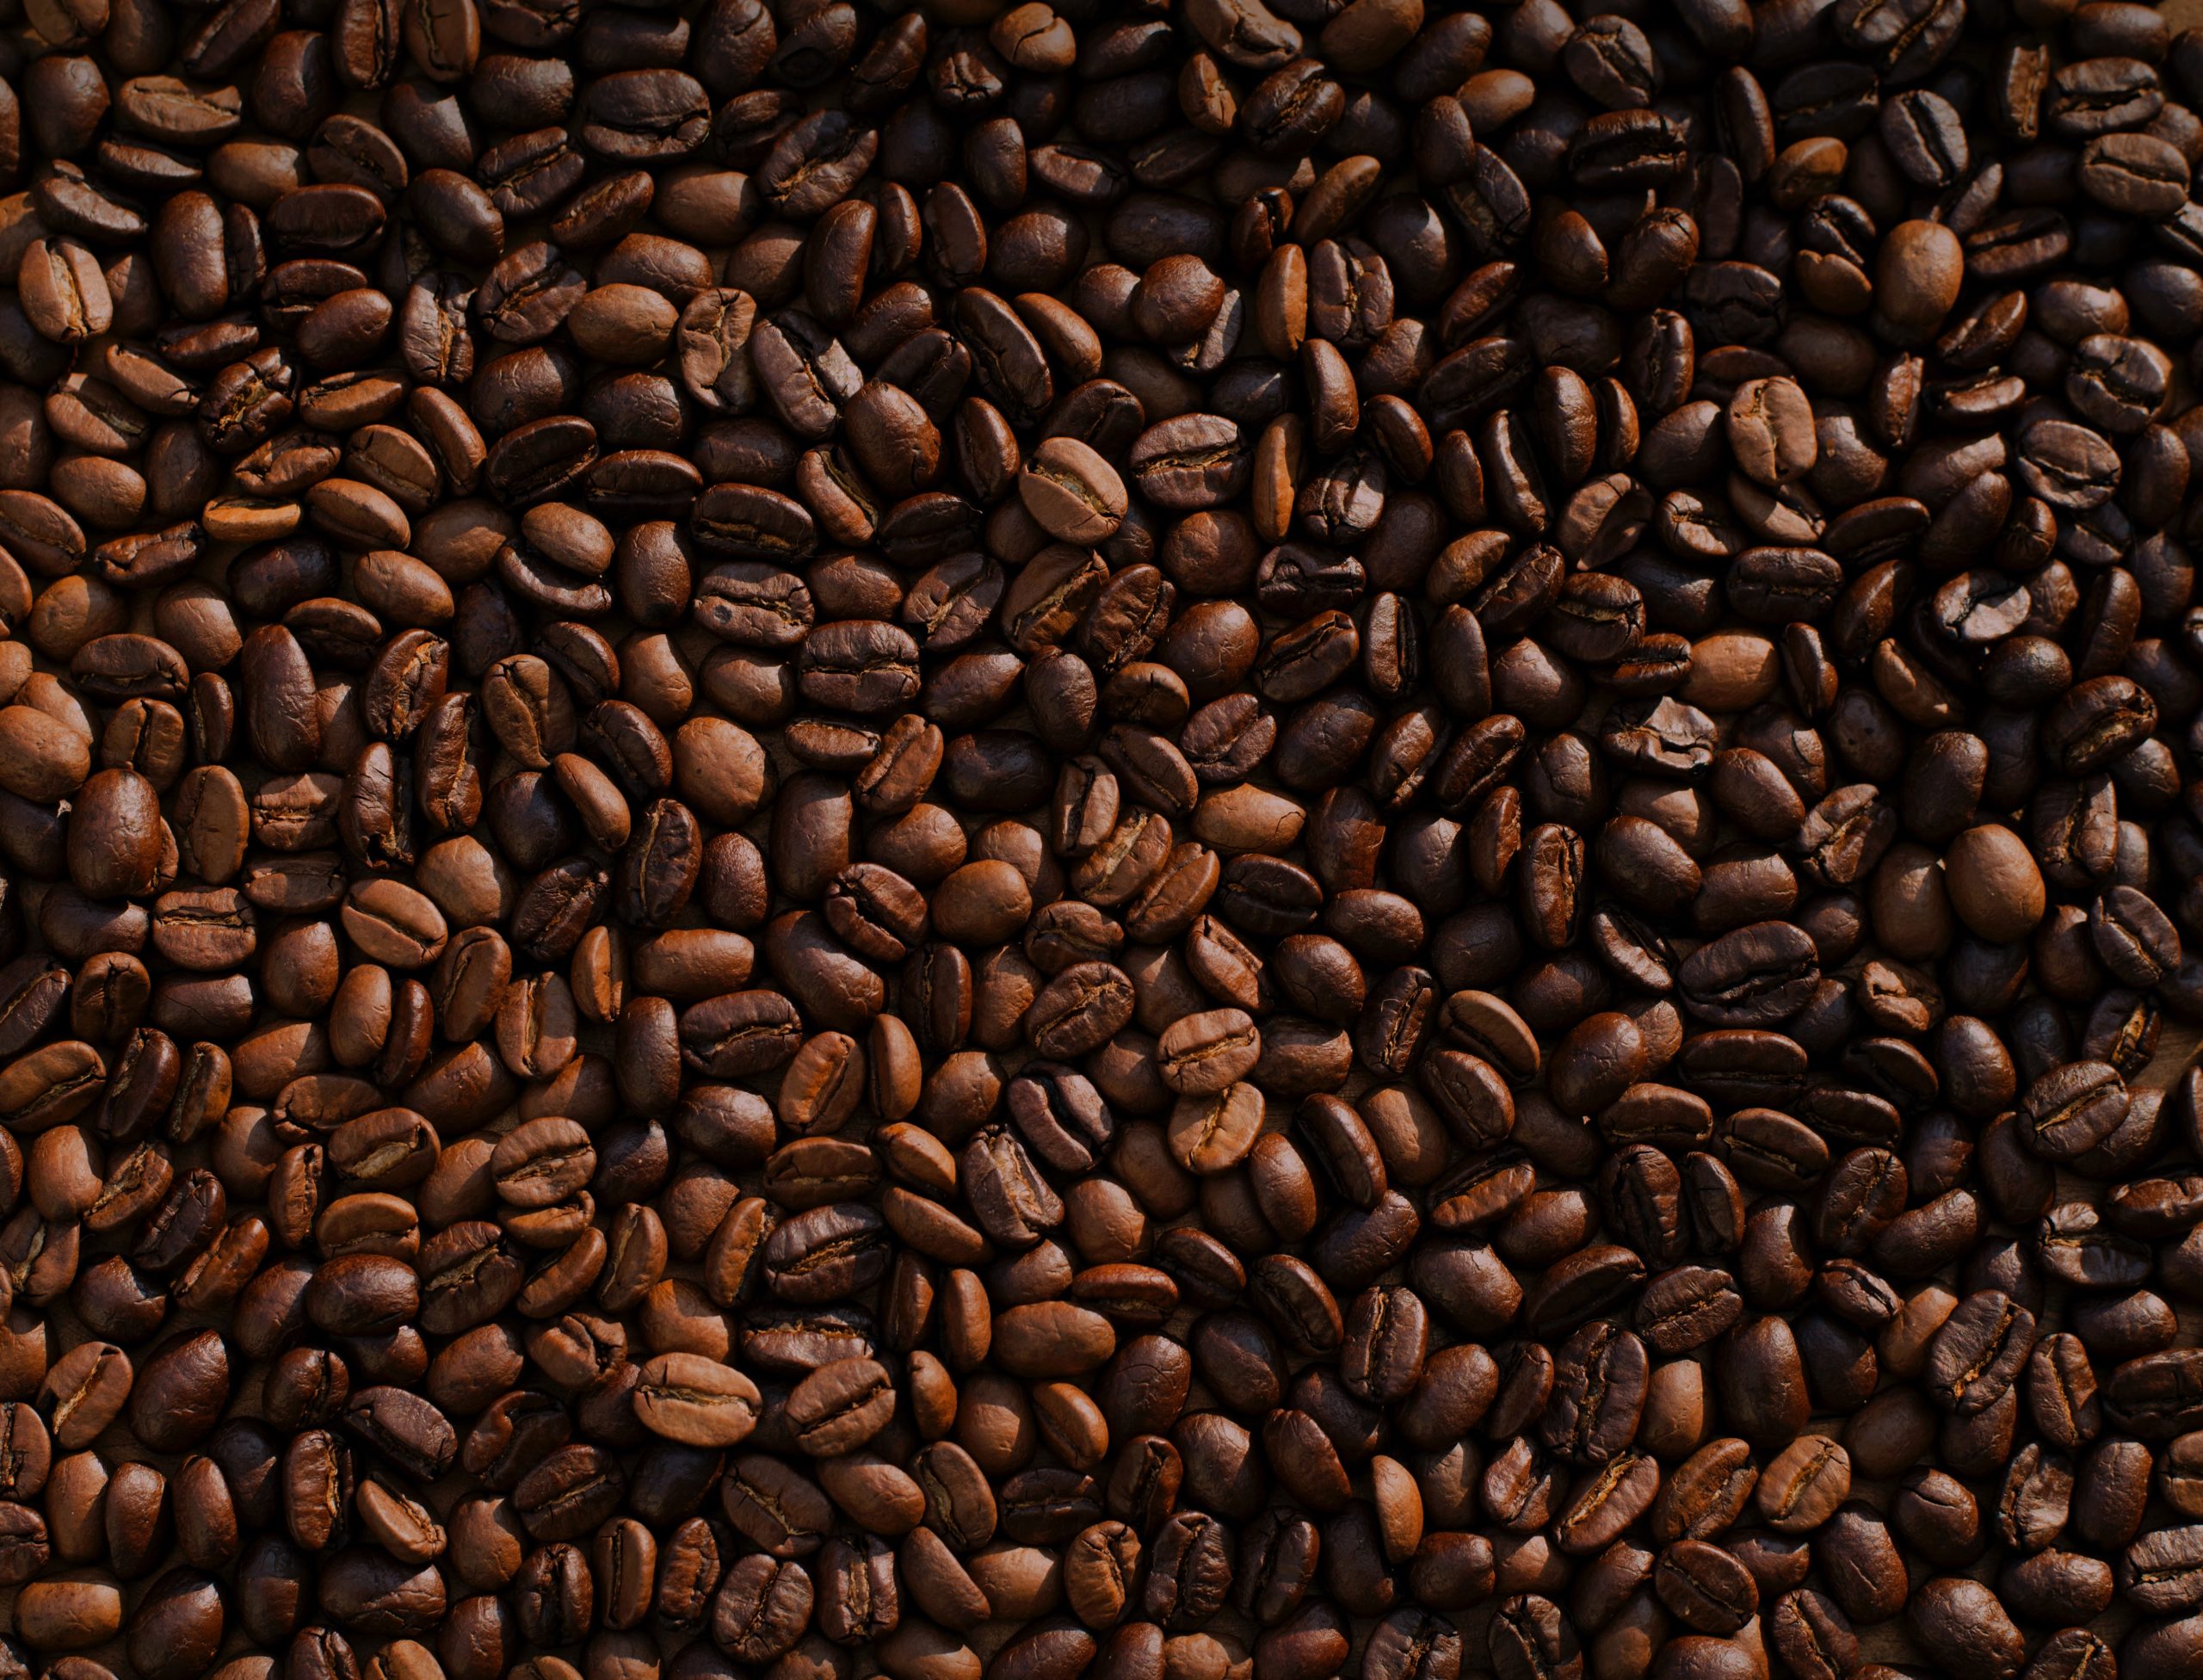 mike kenneally TD4DBagg2wE unsplash scaled What Happens To The Body When Drinking Coffee Every Day?